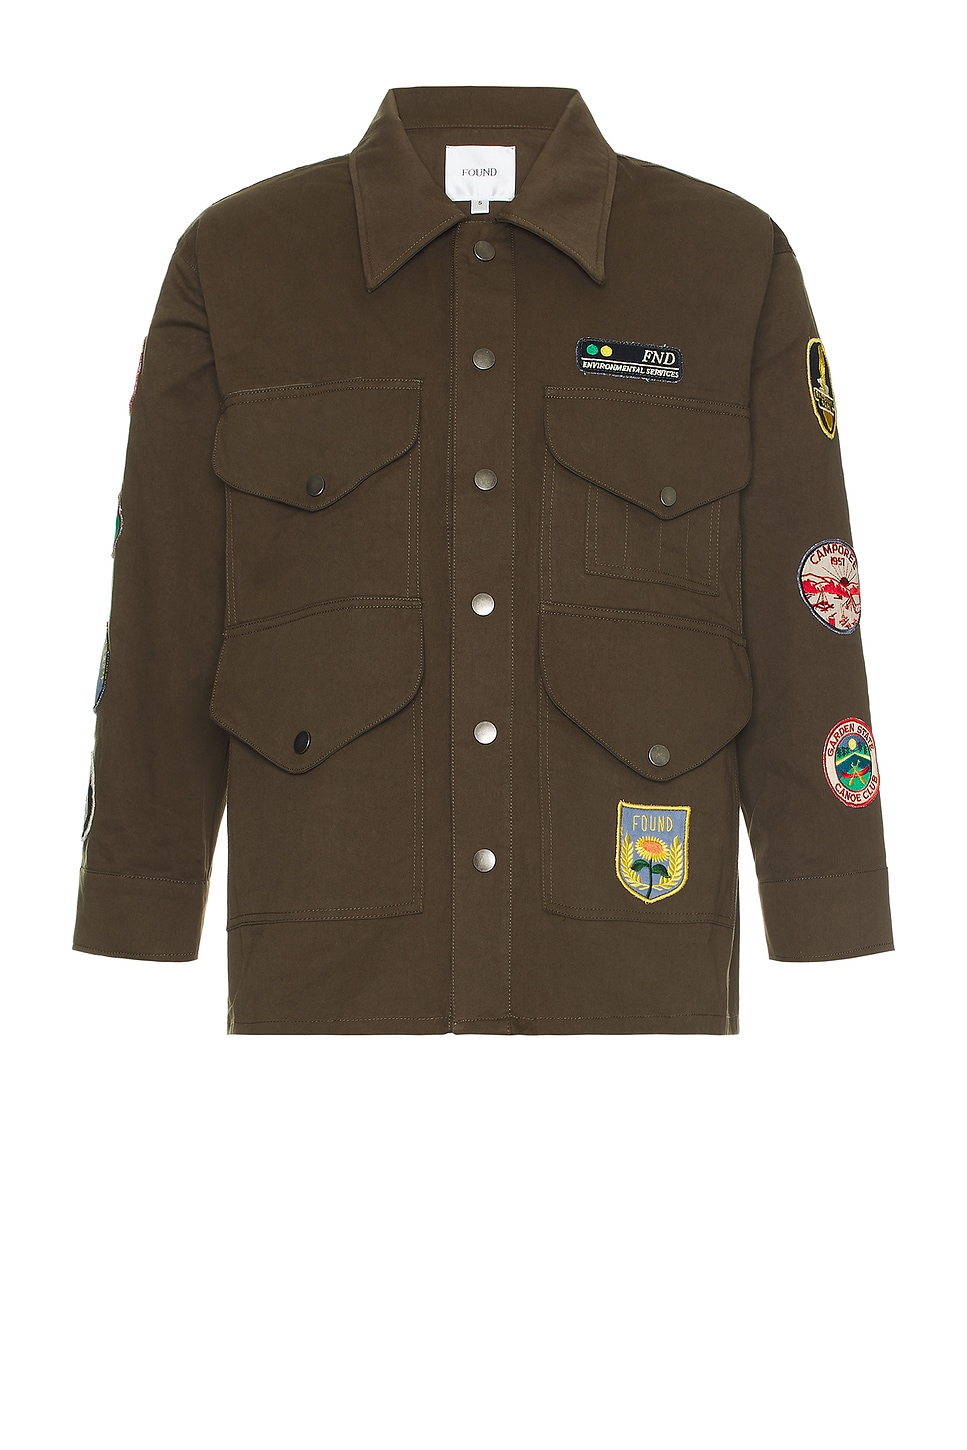 Image 1 of Found Multi Patch Work Jacket in Mocha